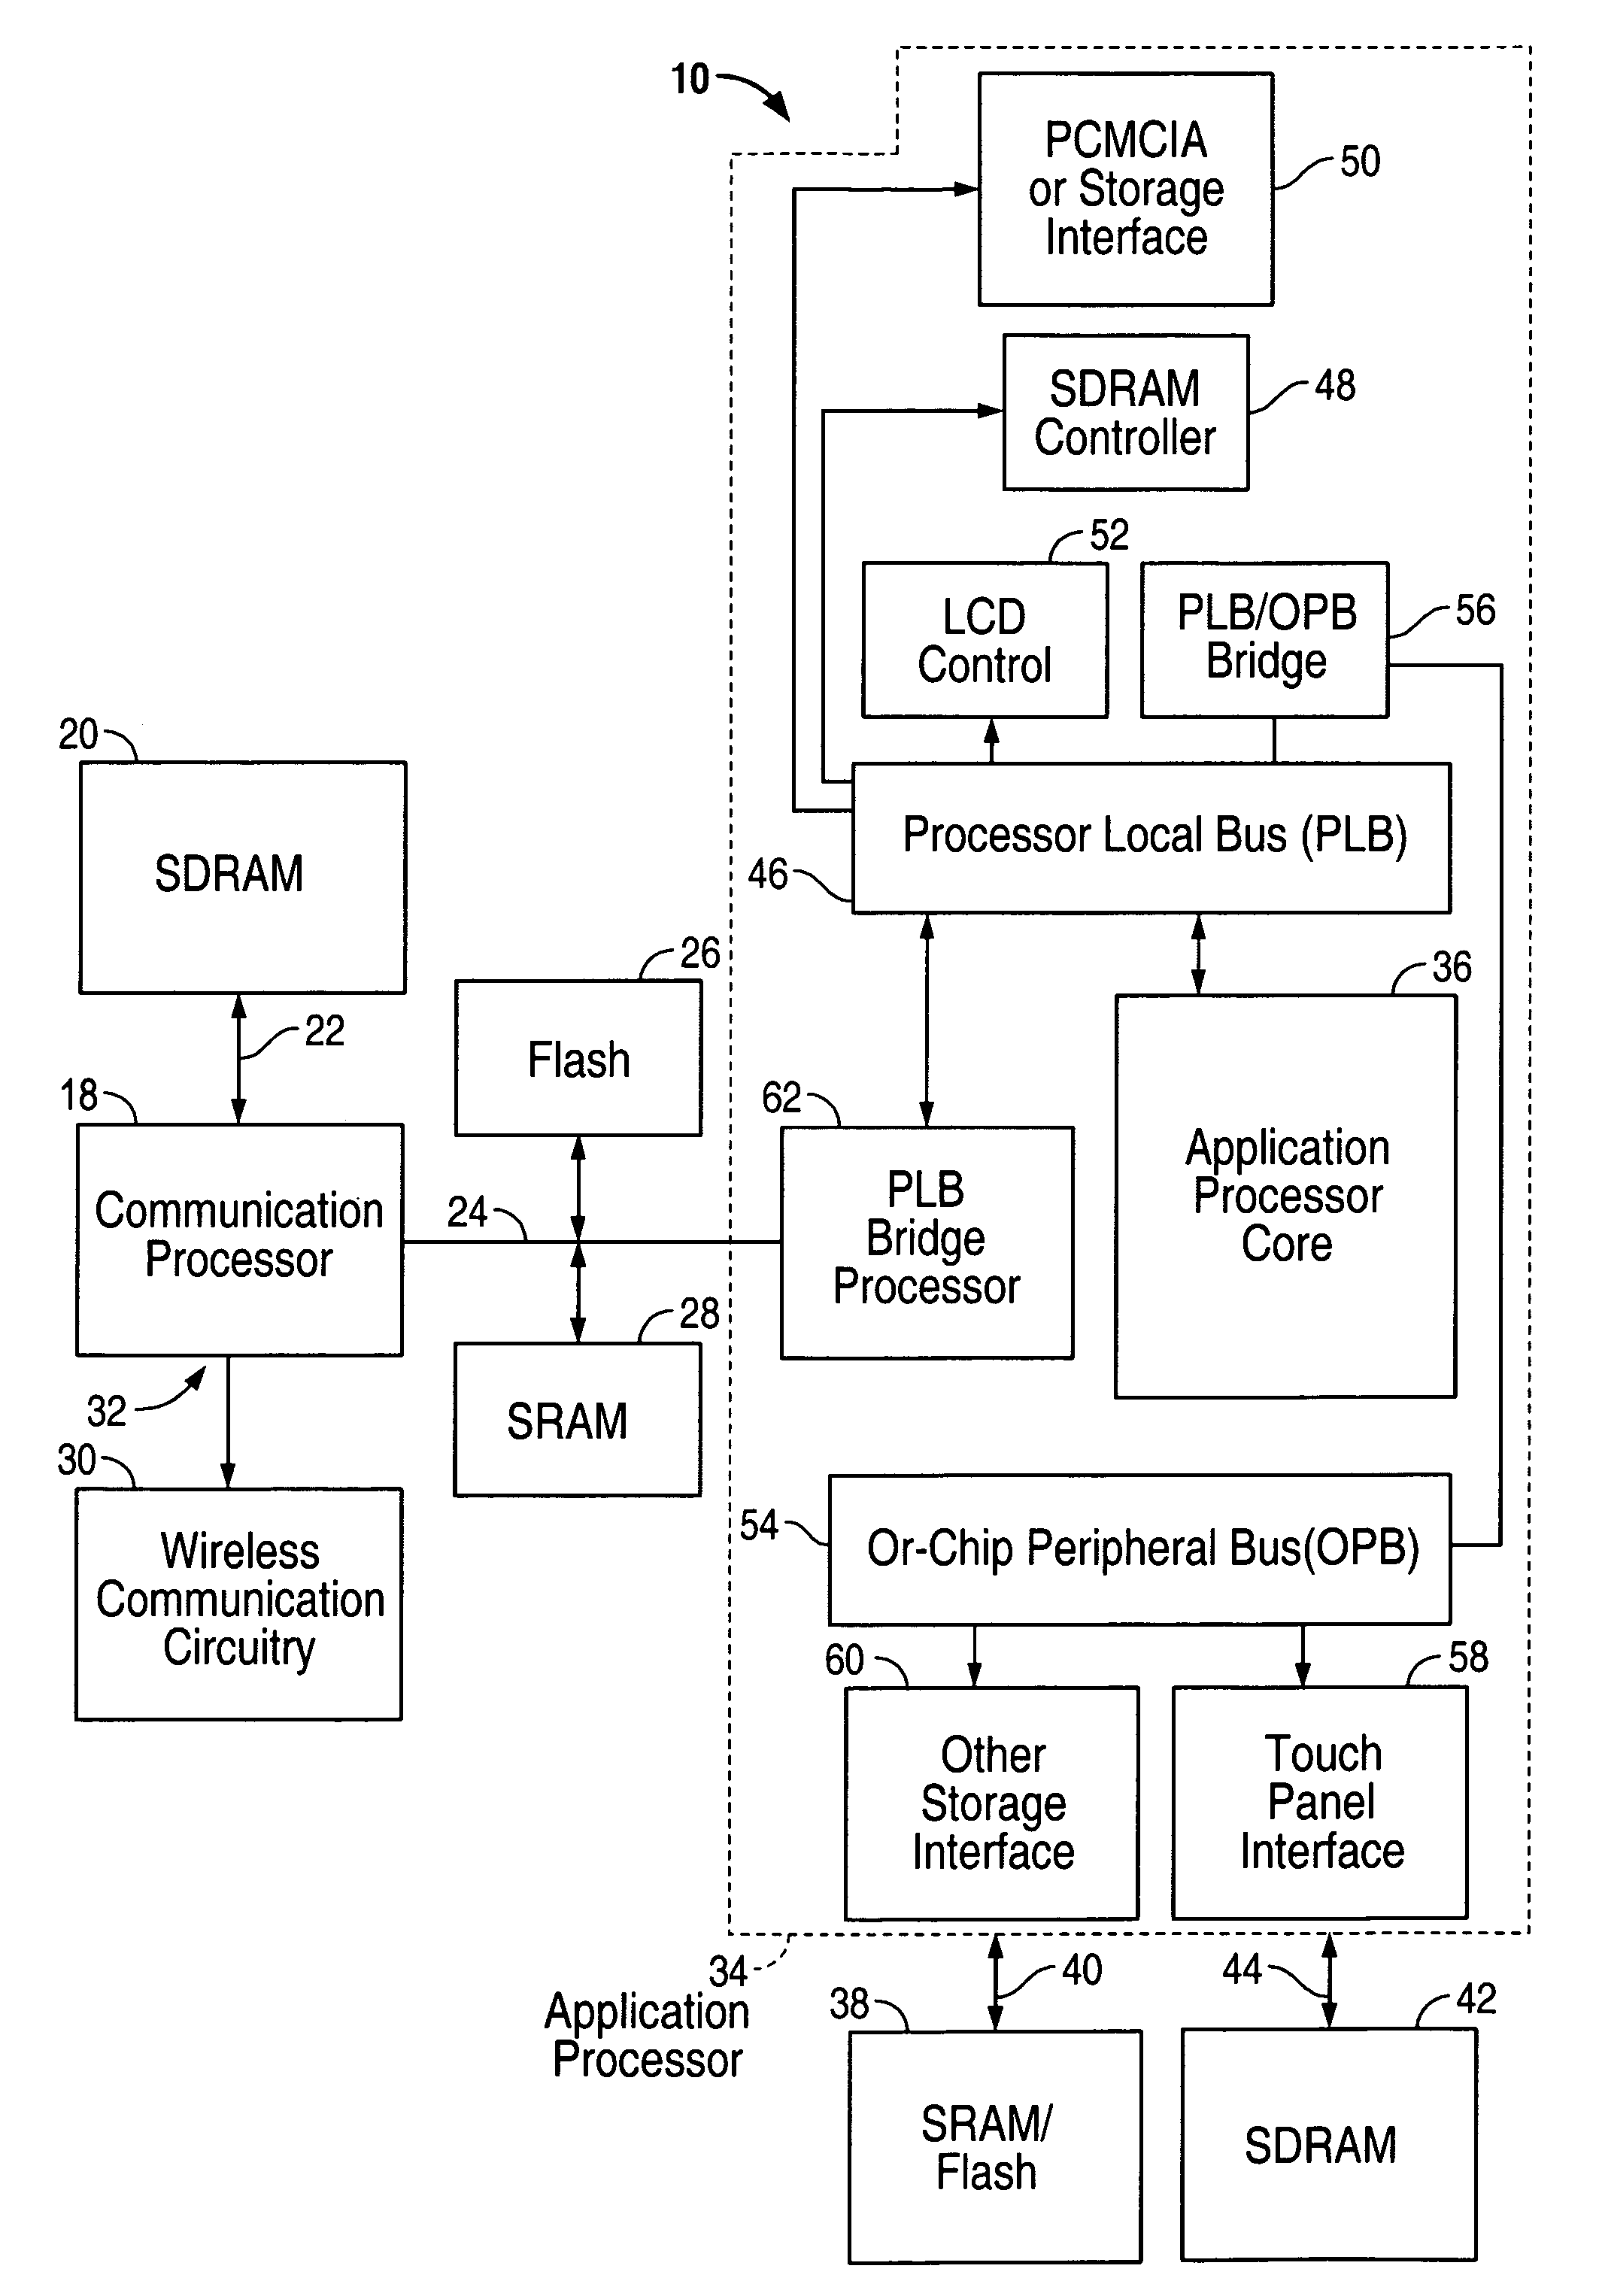 Low power dual processor architecture for multi mode devices